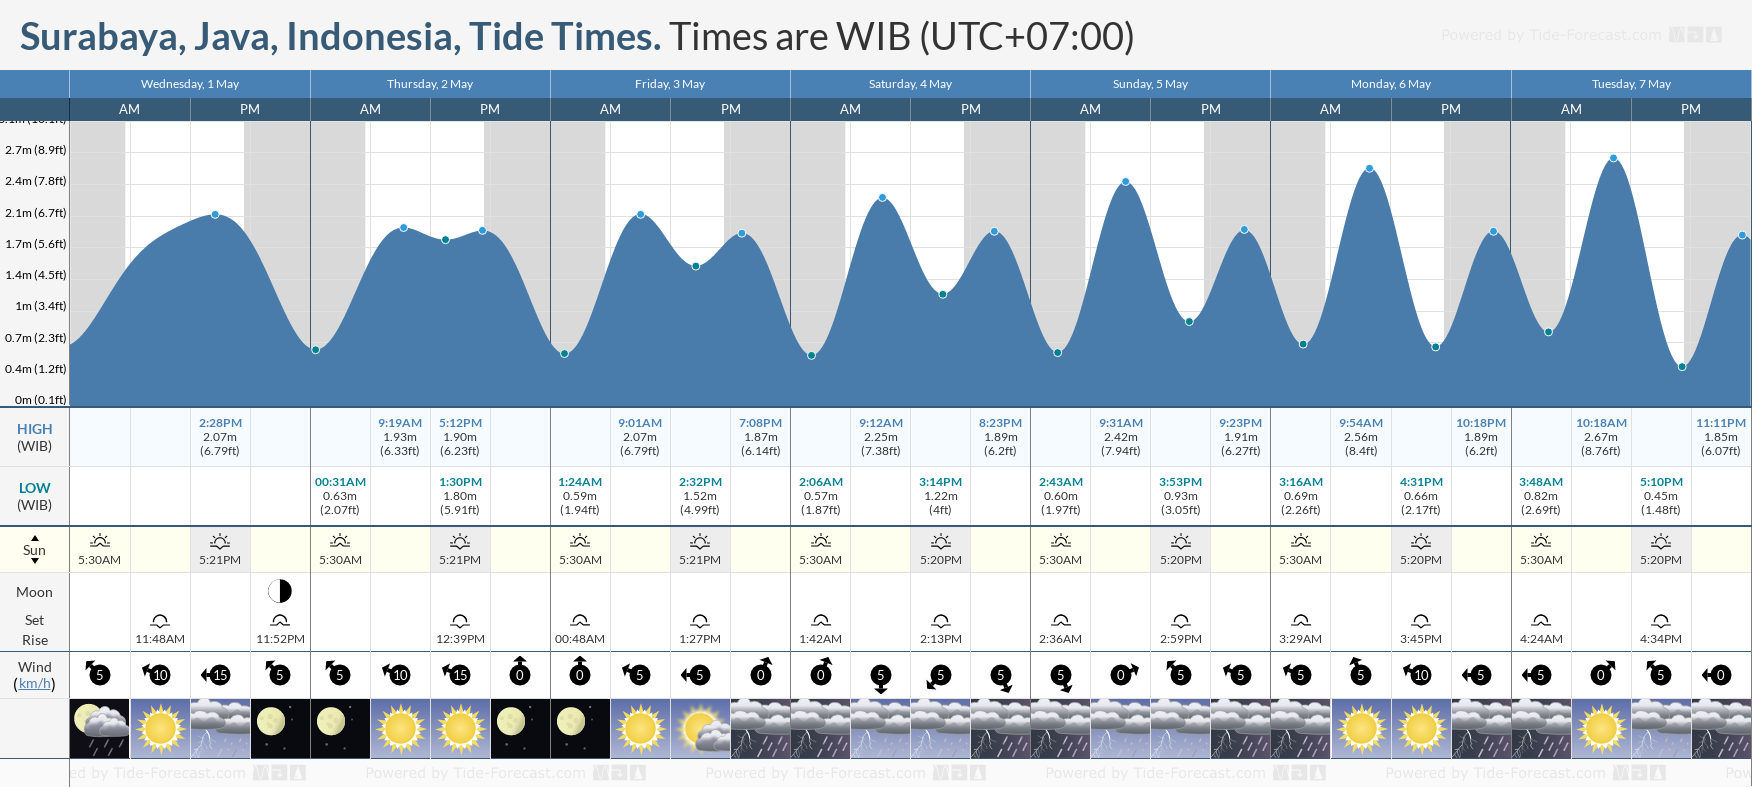 Surabaya, Java, Indonesia Tide Chart including high and low tide tide times for the next 7 days